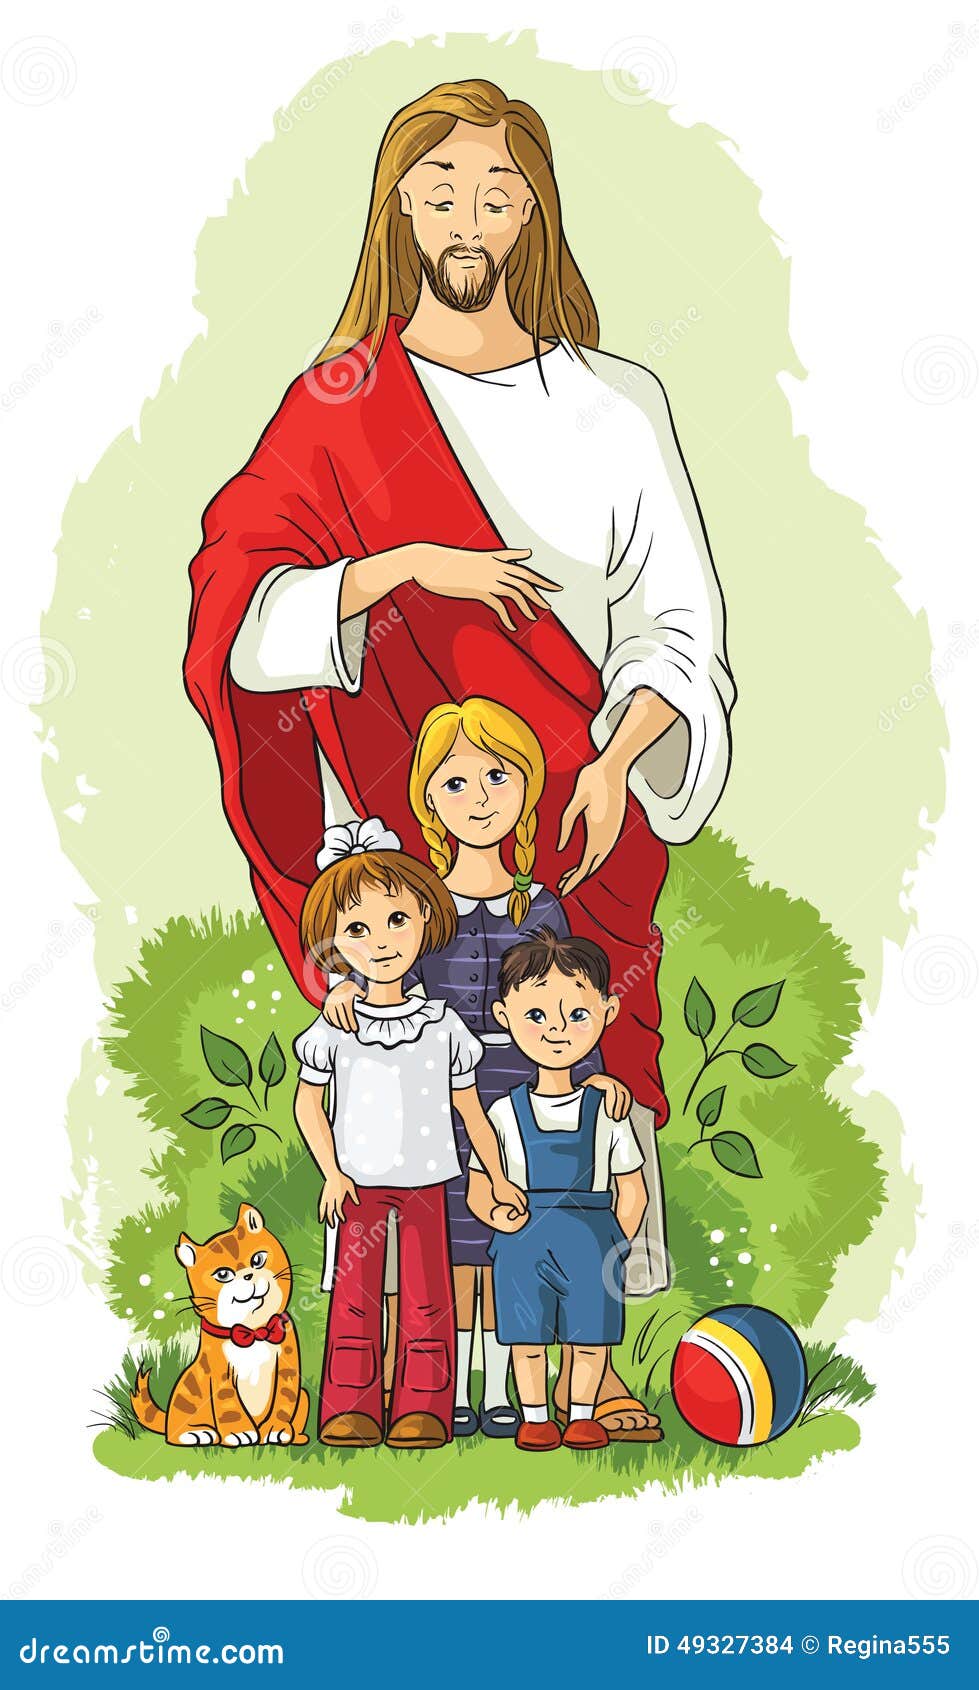 clipart jesus with child - photo #19